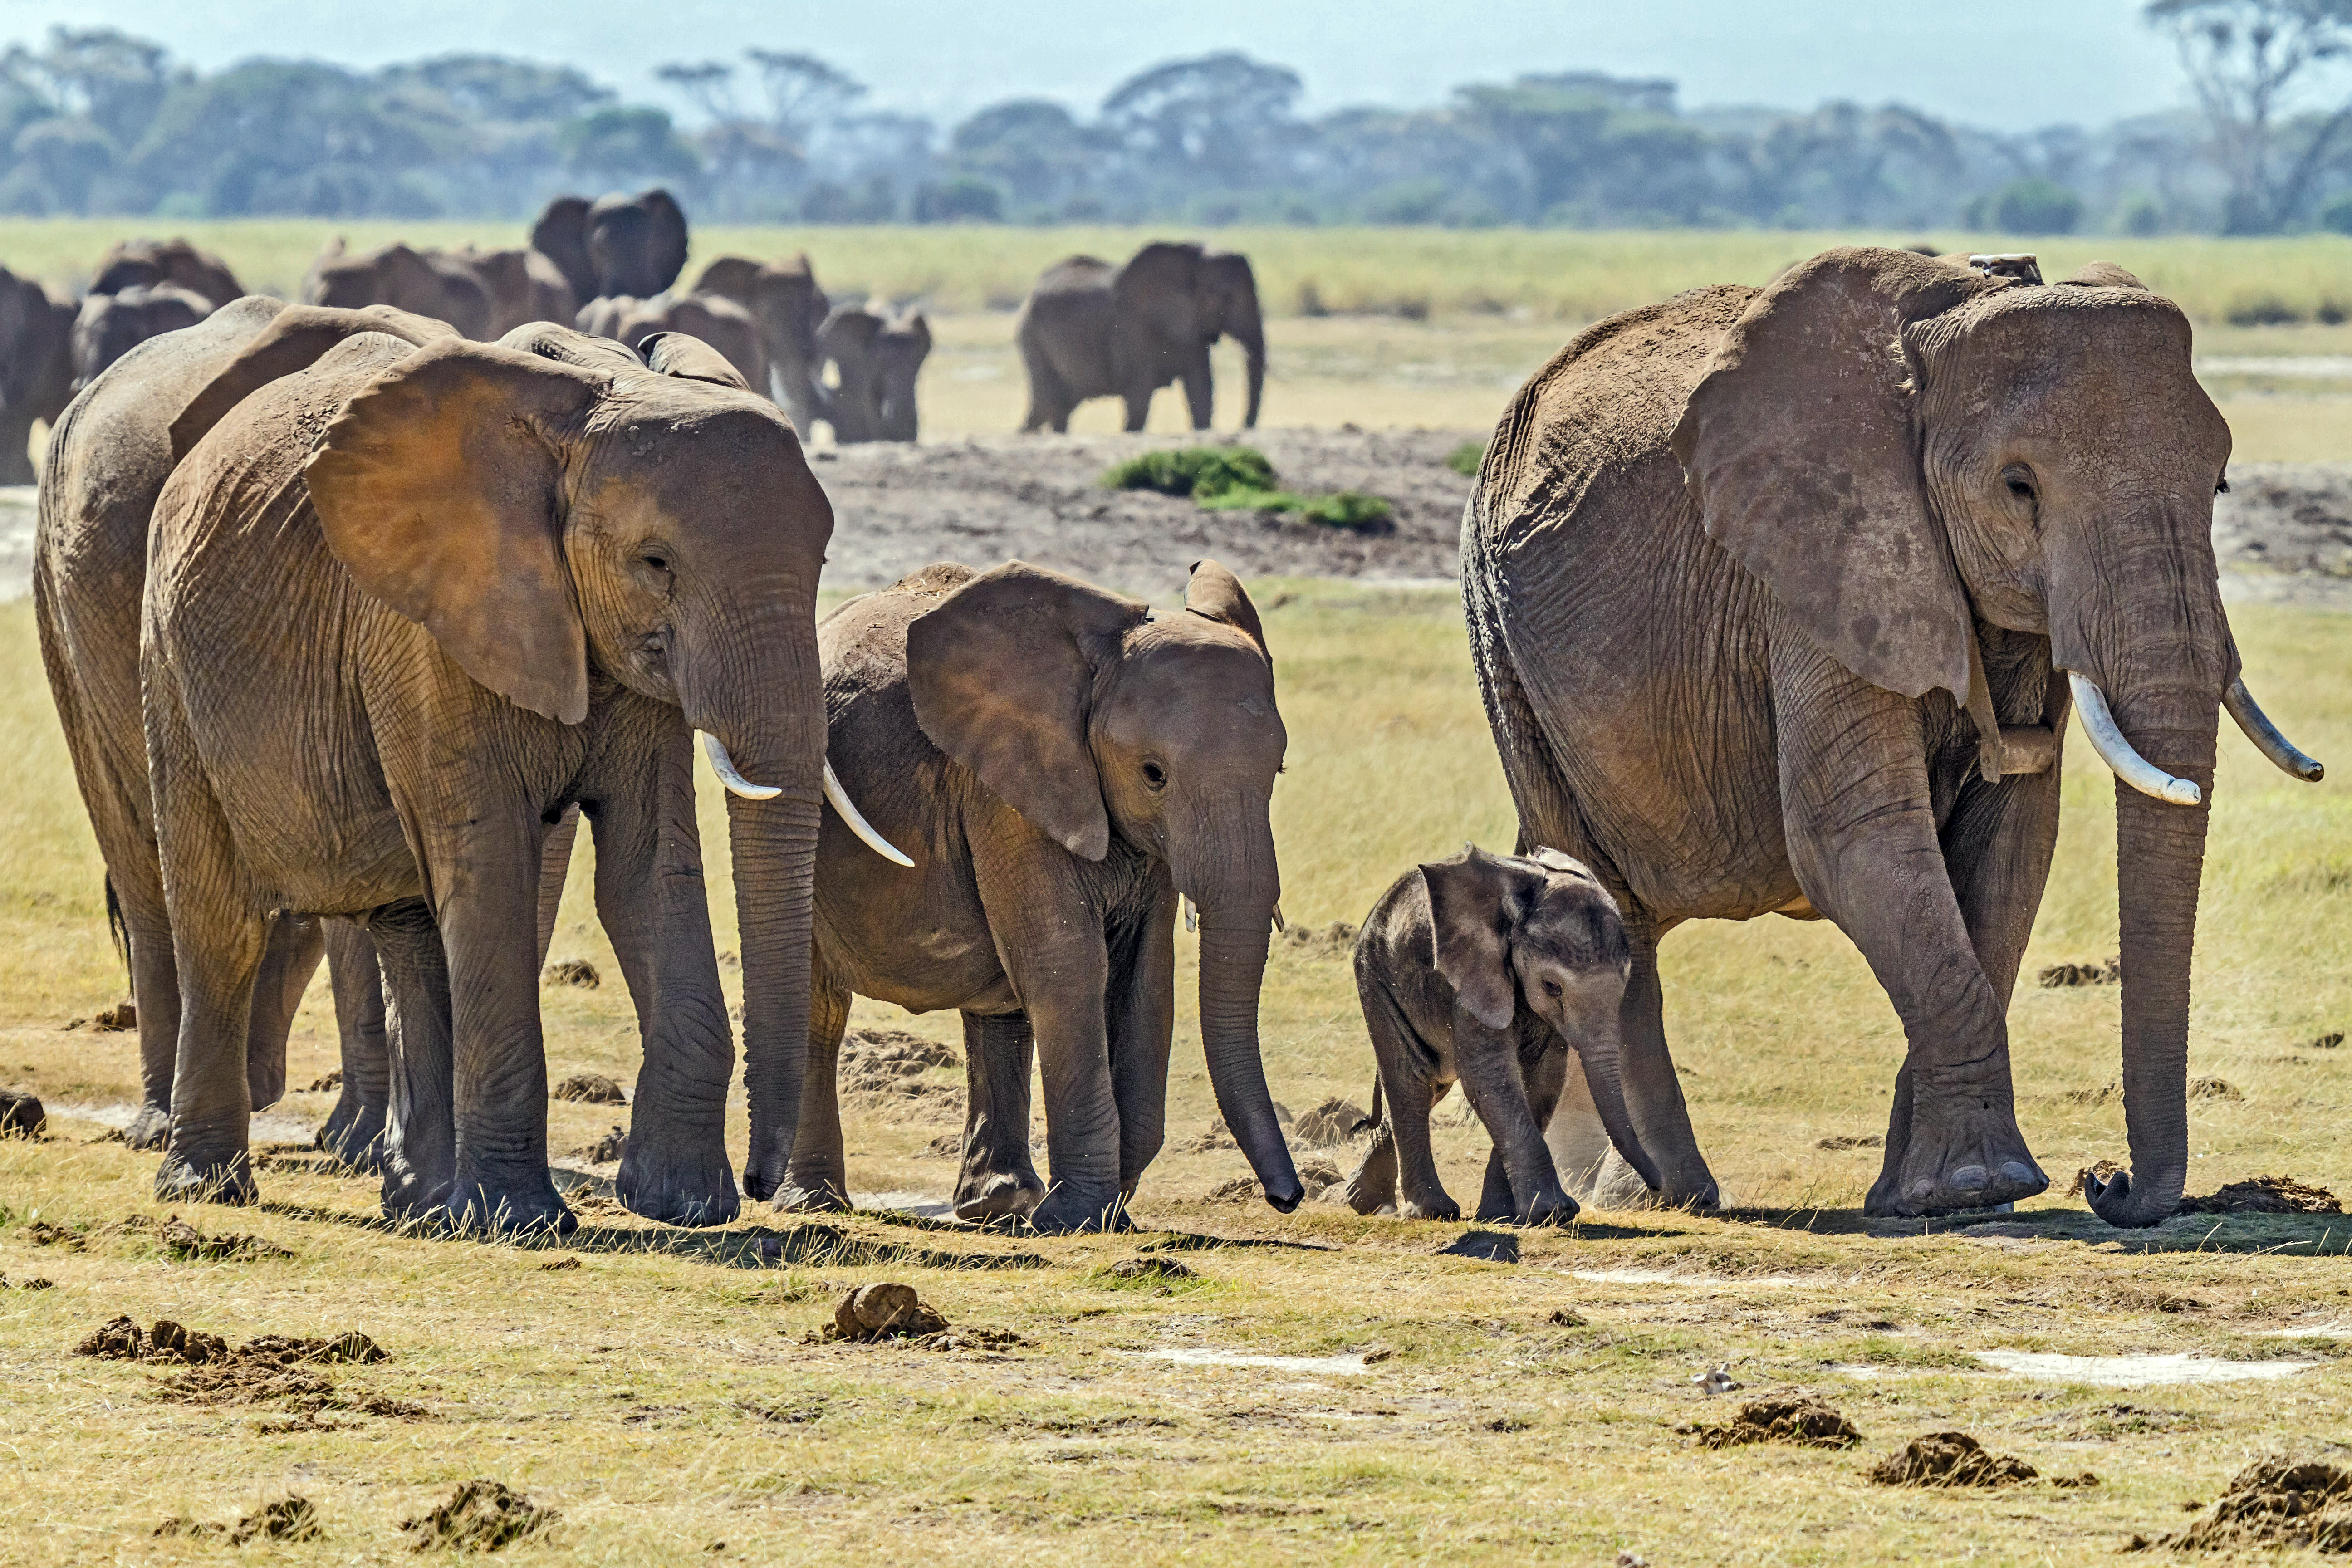 Who holds the wisdom in an elephant herd?